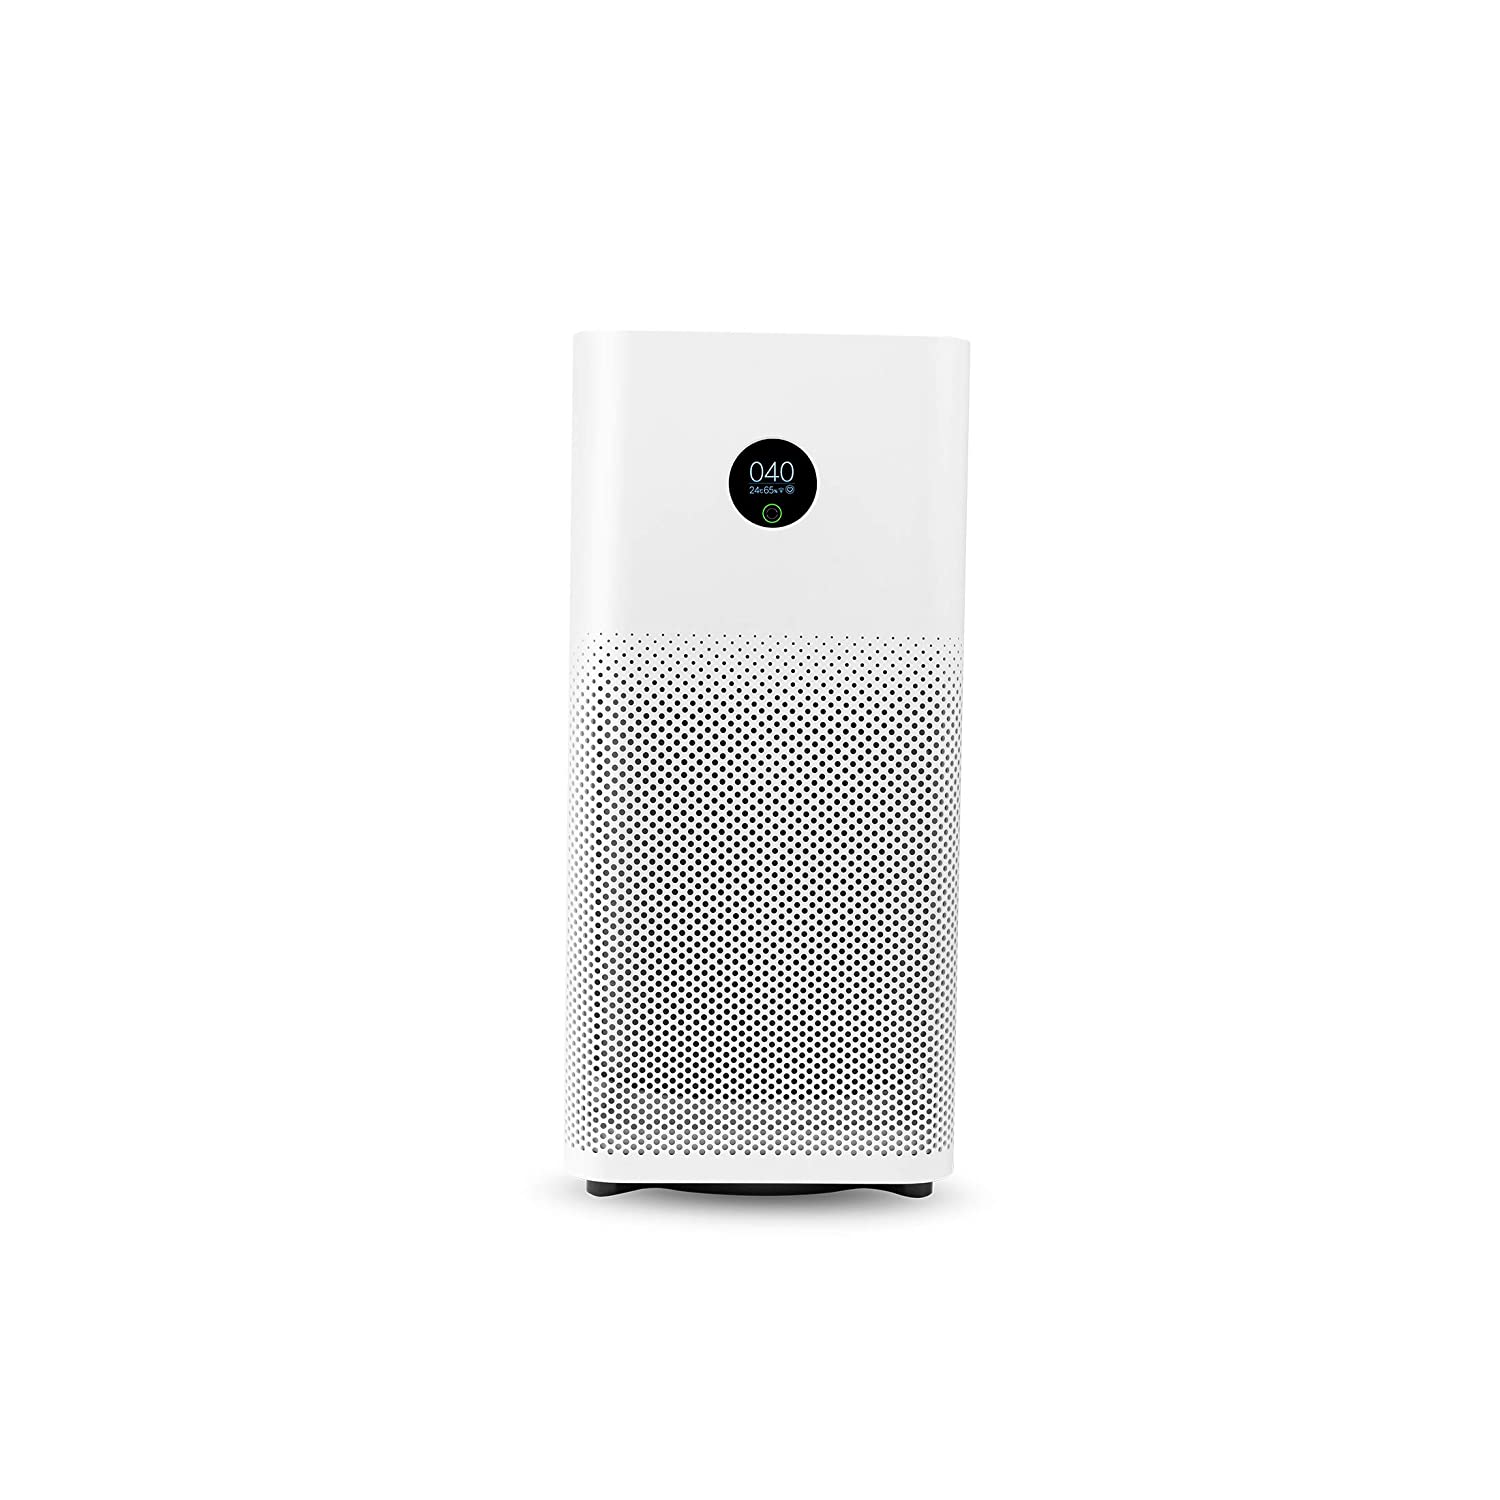 Mi air purifier 3 use true HEPA filter and is one of the best selling air purifiers in India for home